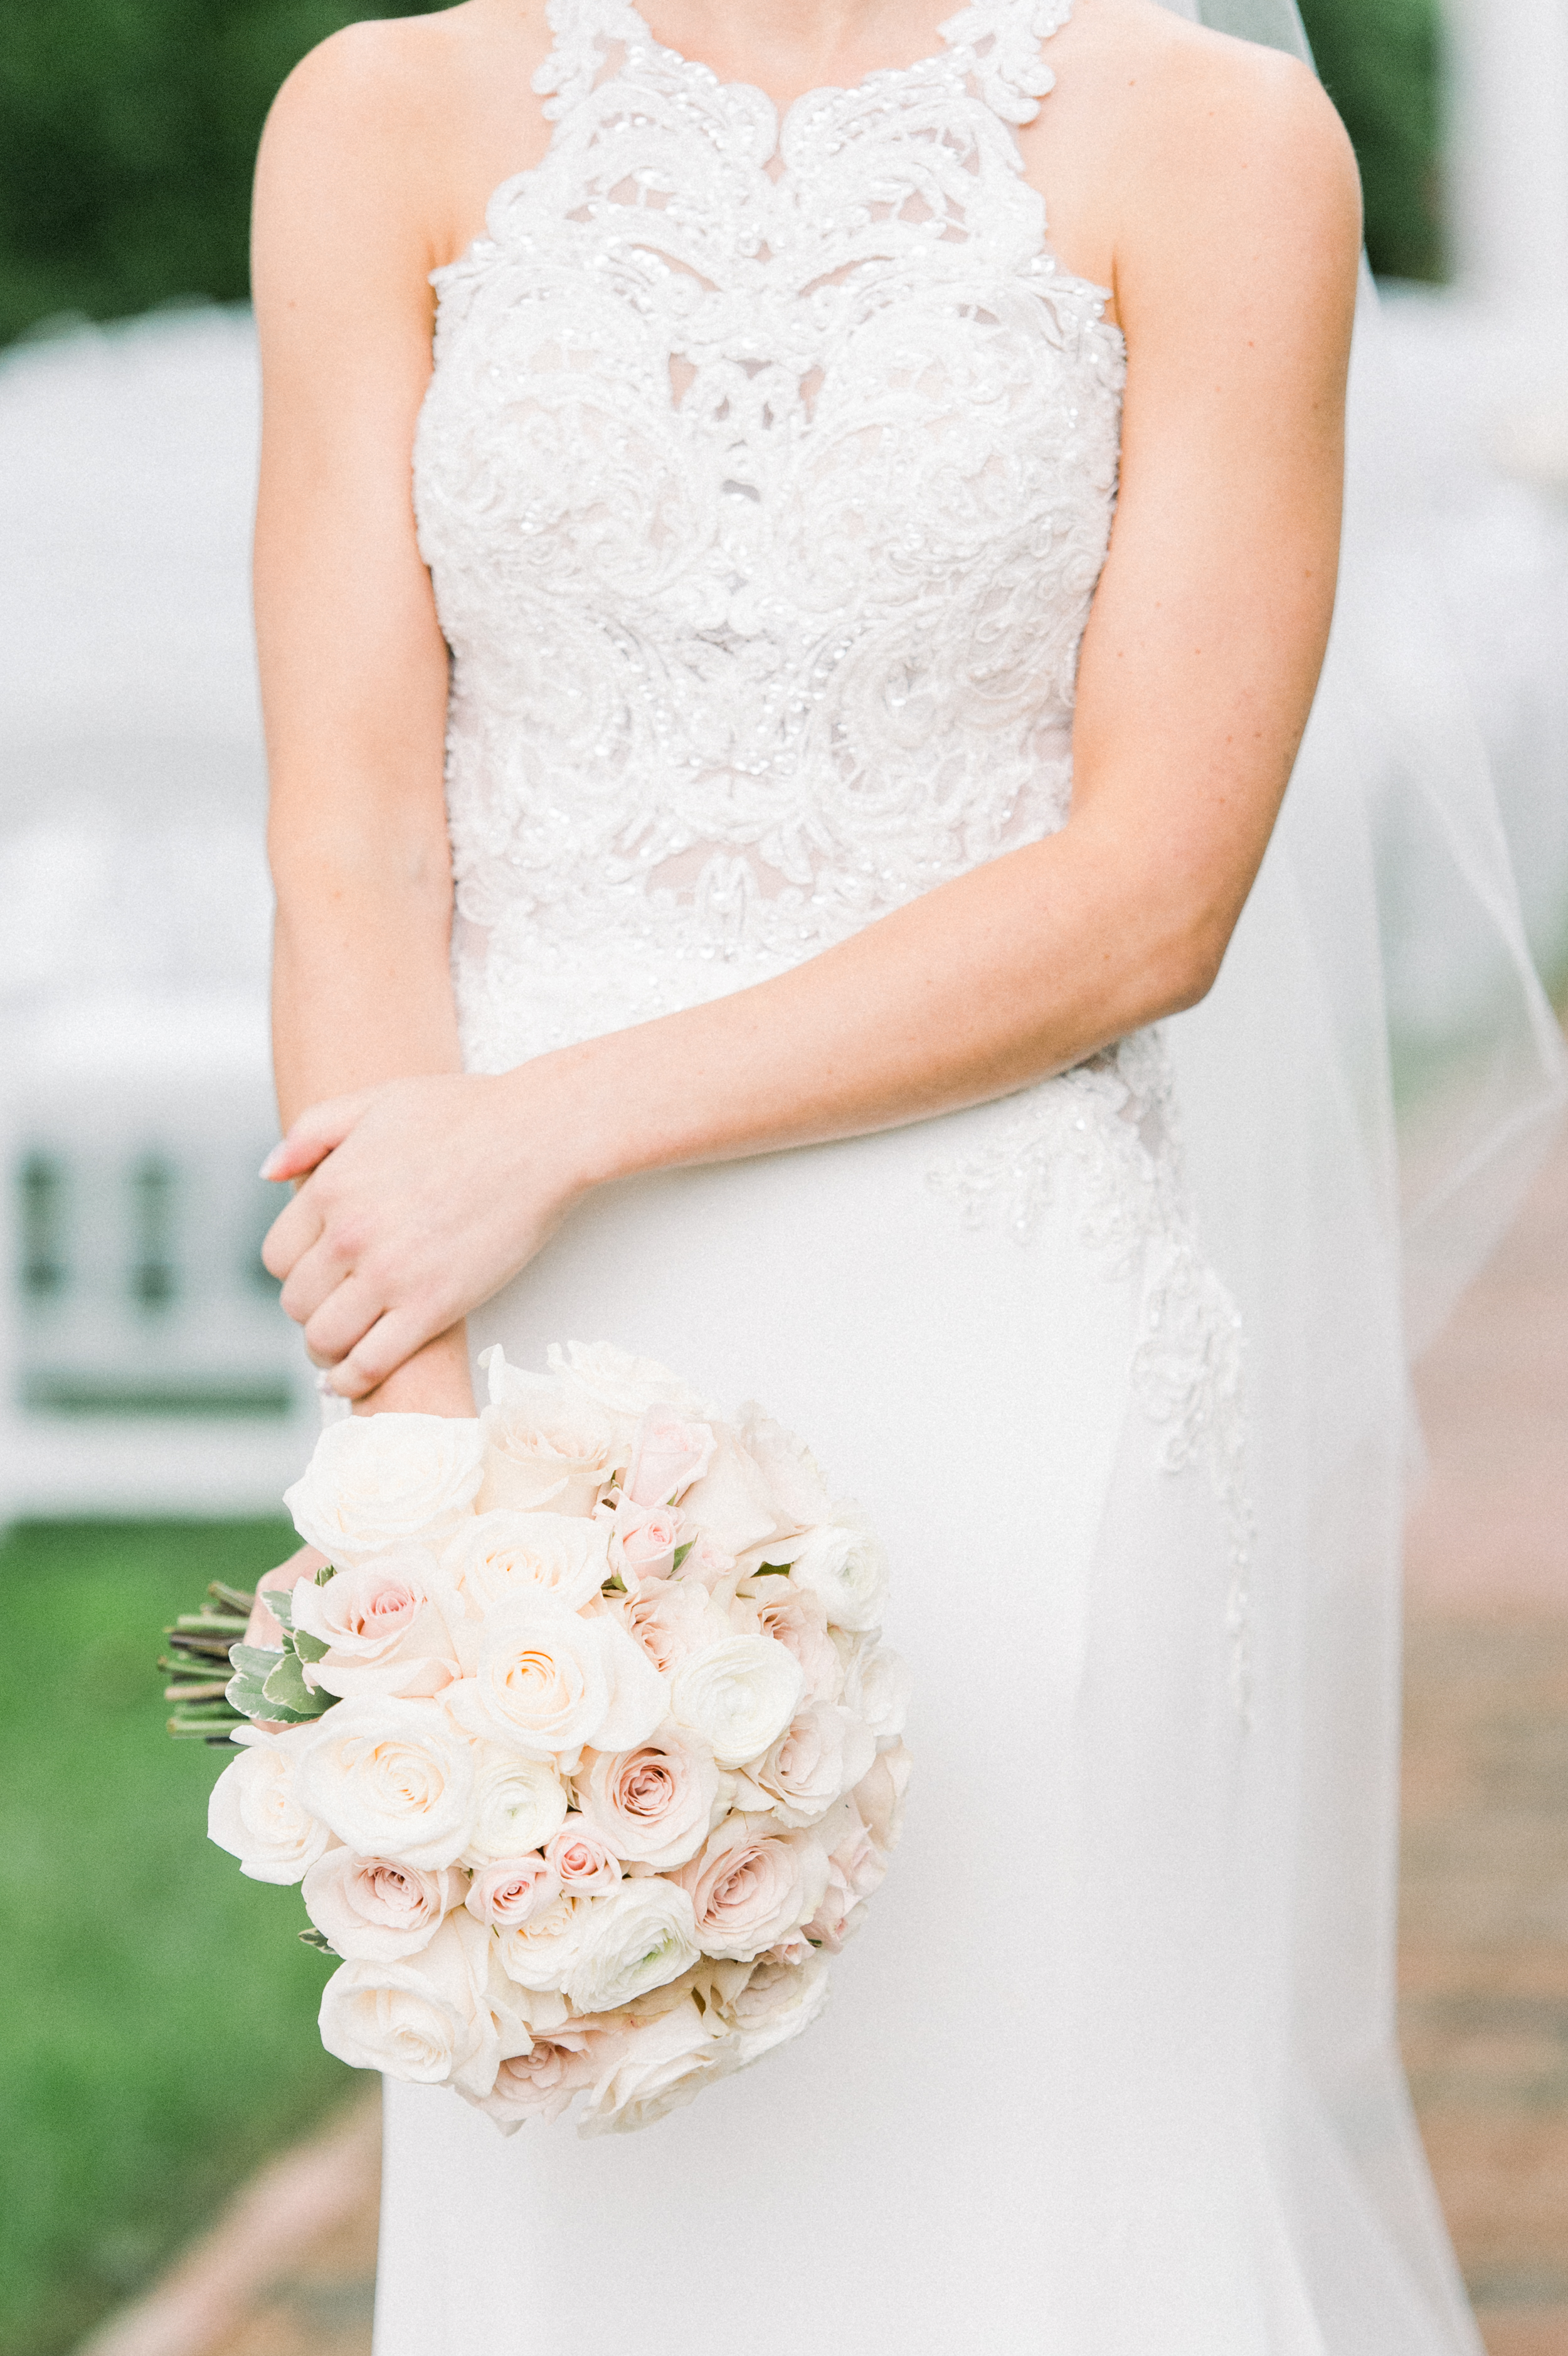 blush bouquet and lace dress details at a wedding at the commons 1854